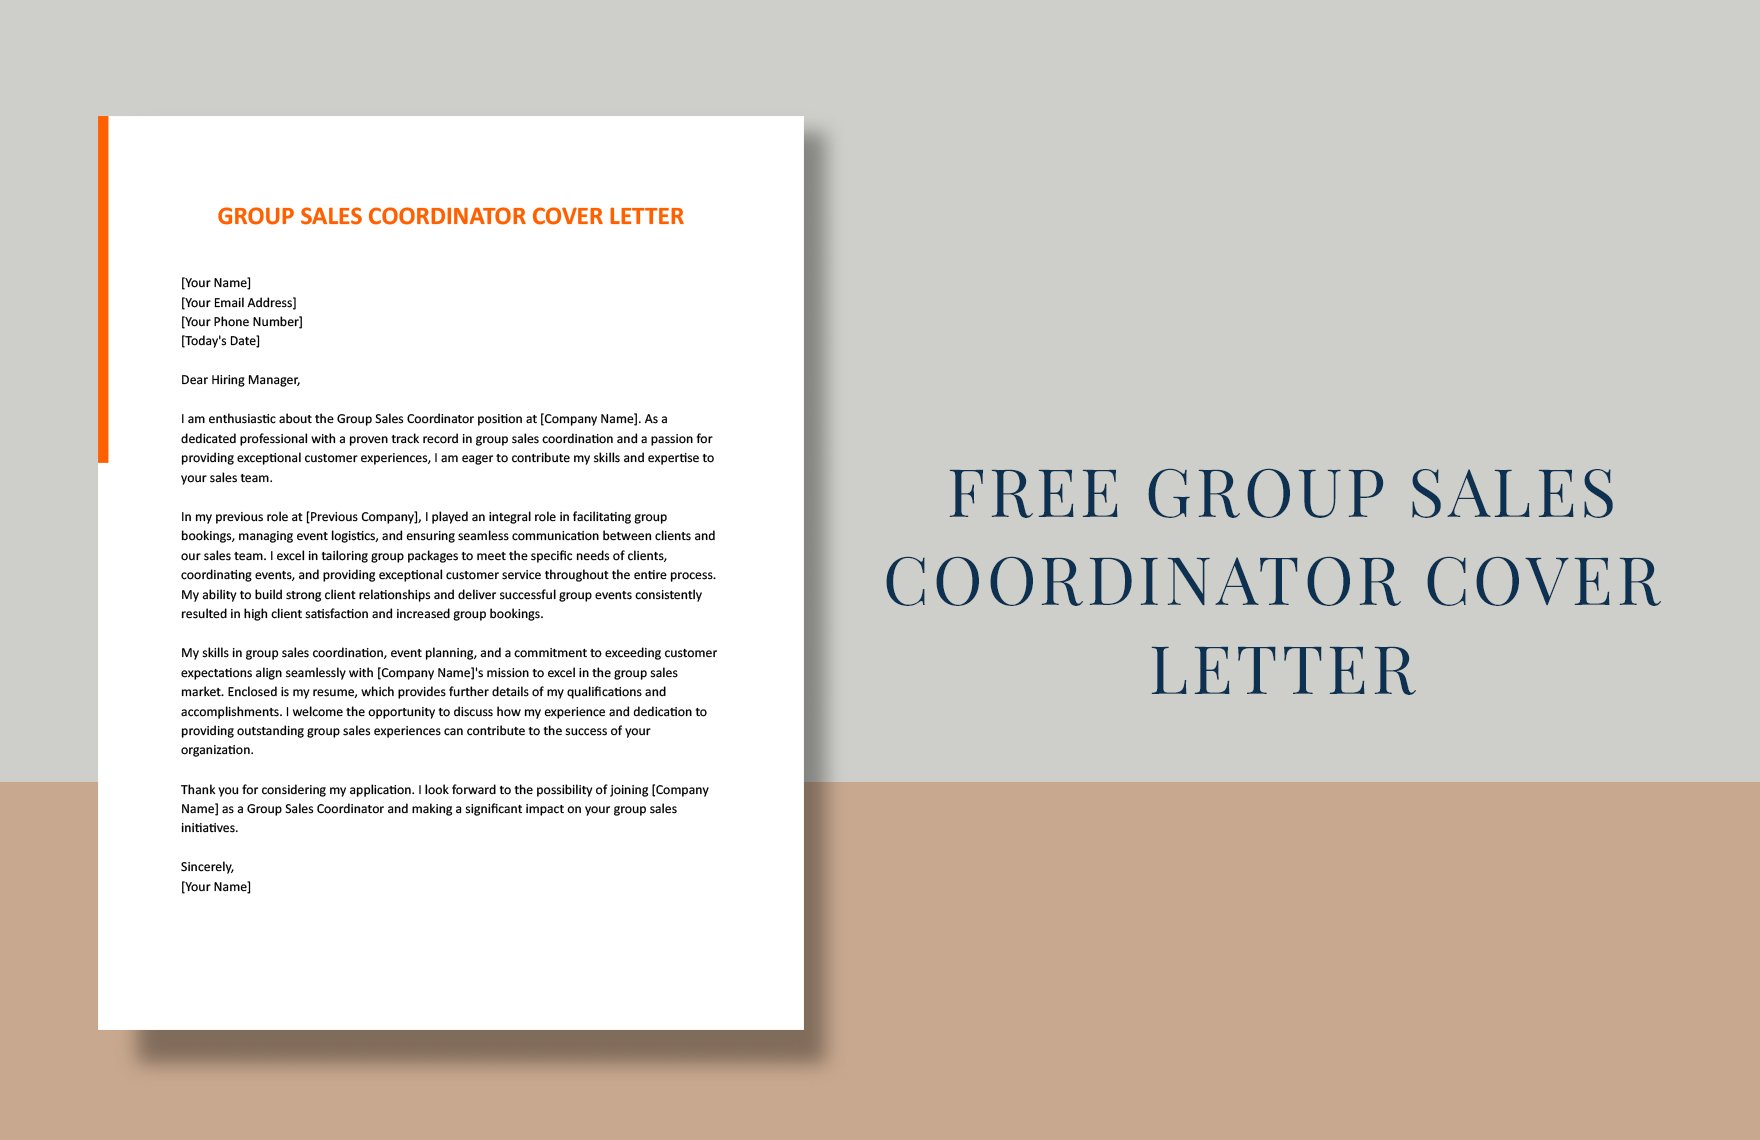 Group Sales Coordinator Cover Letter